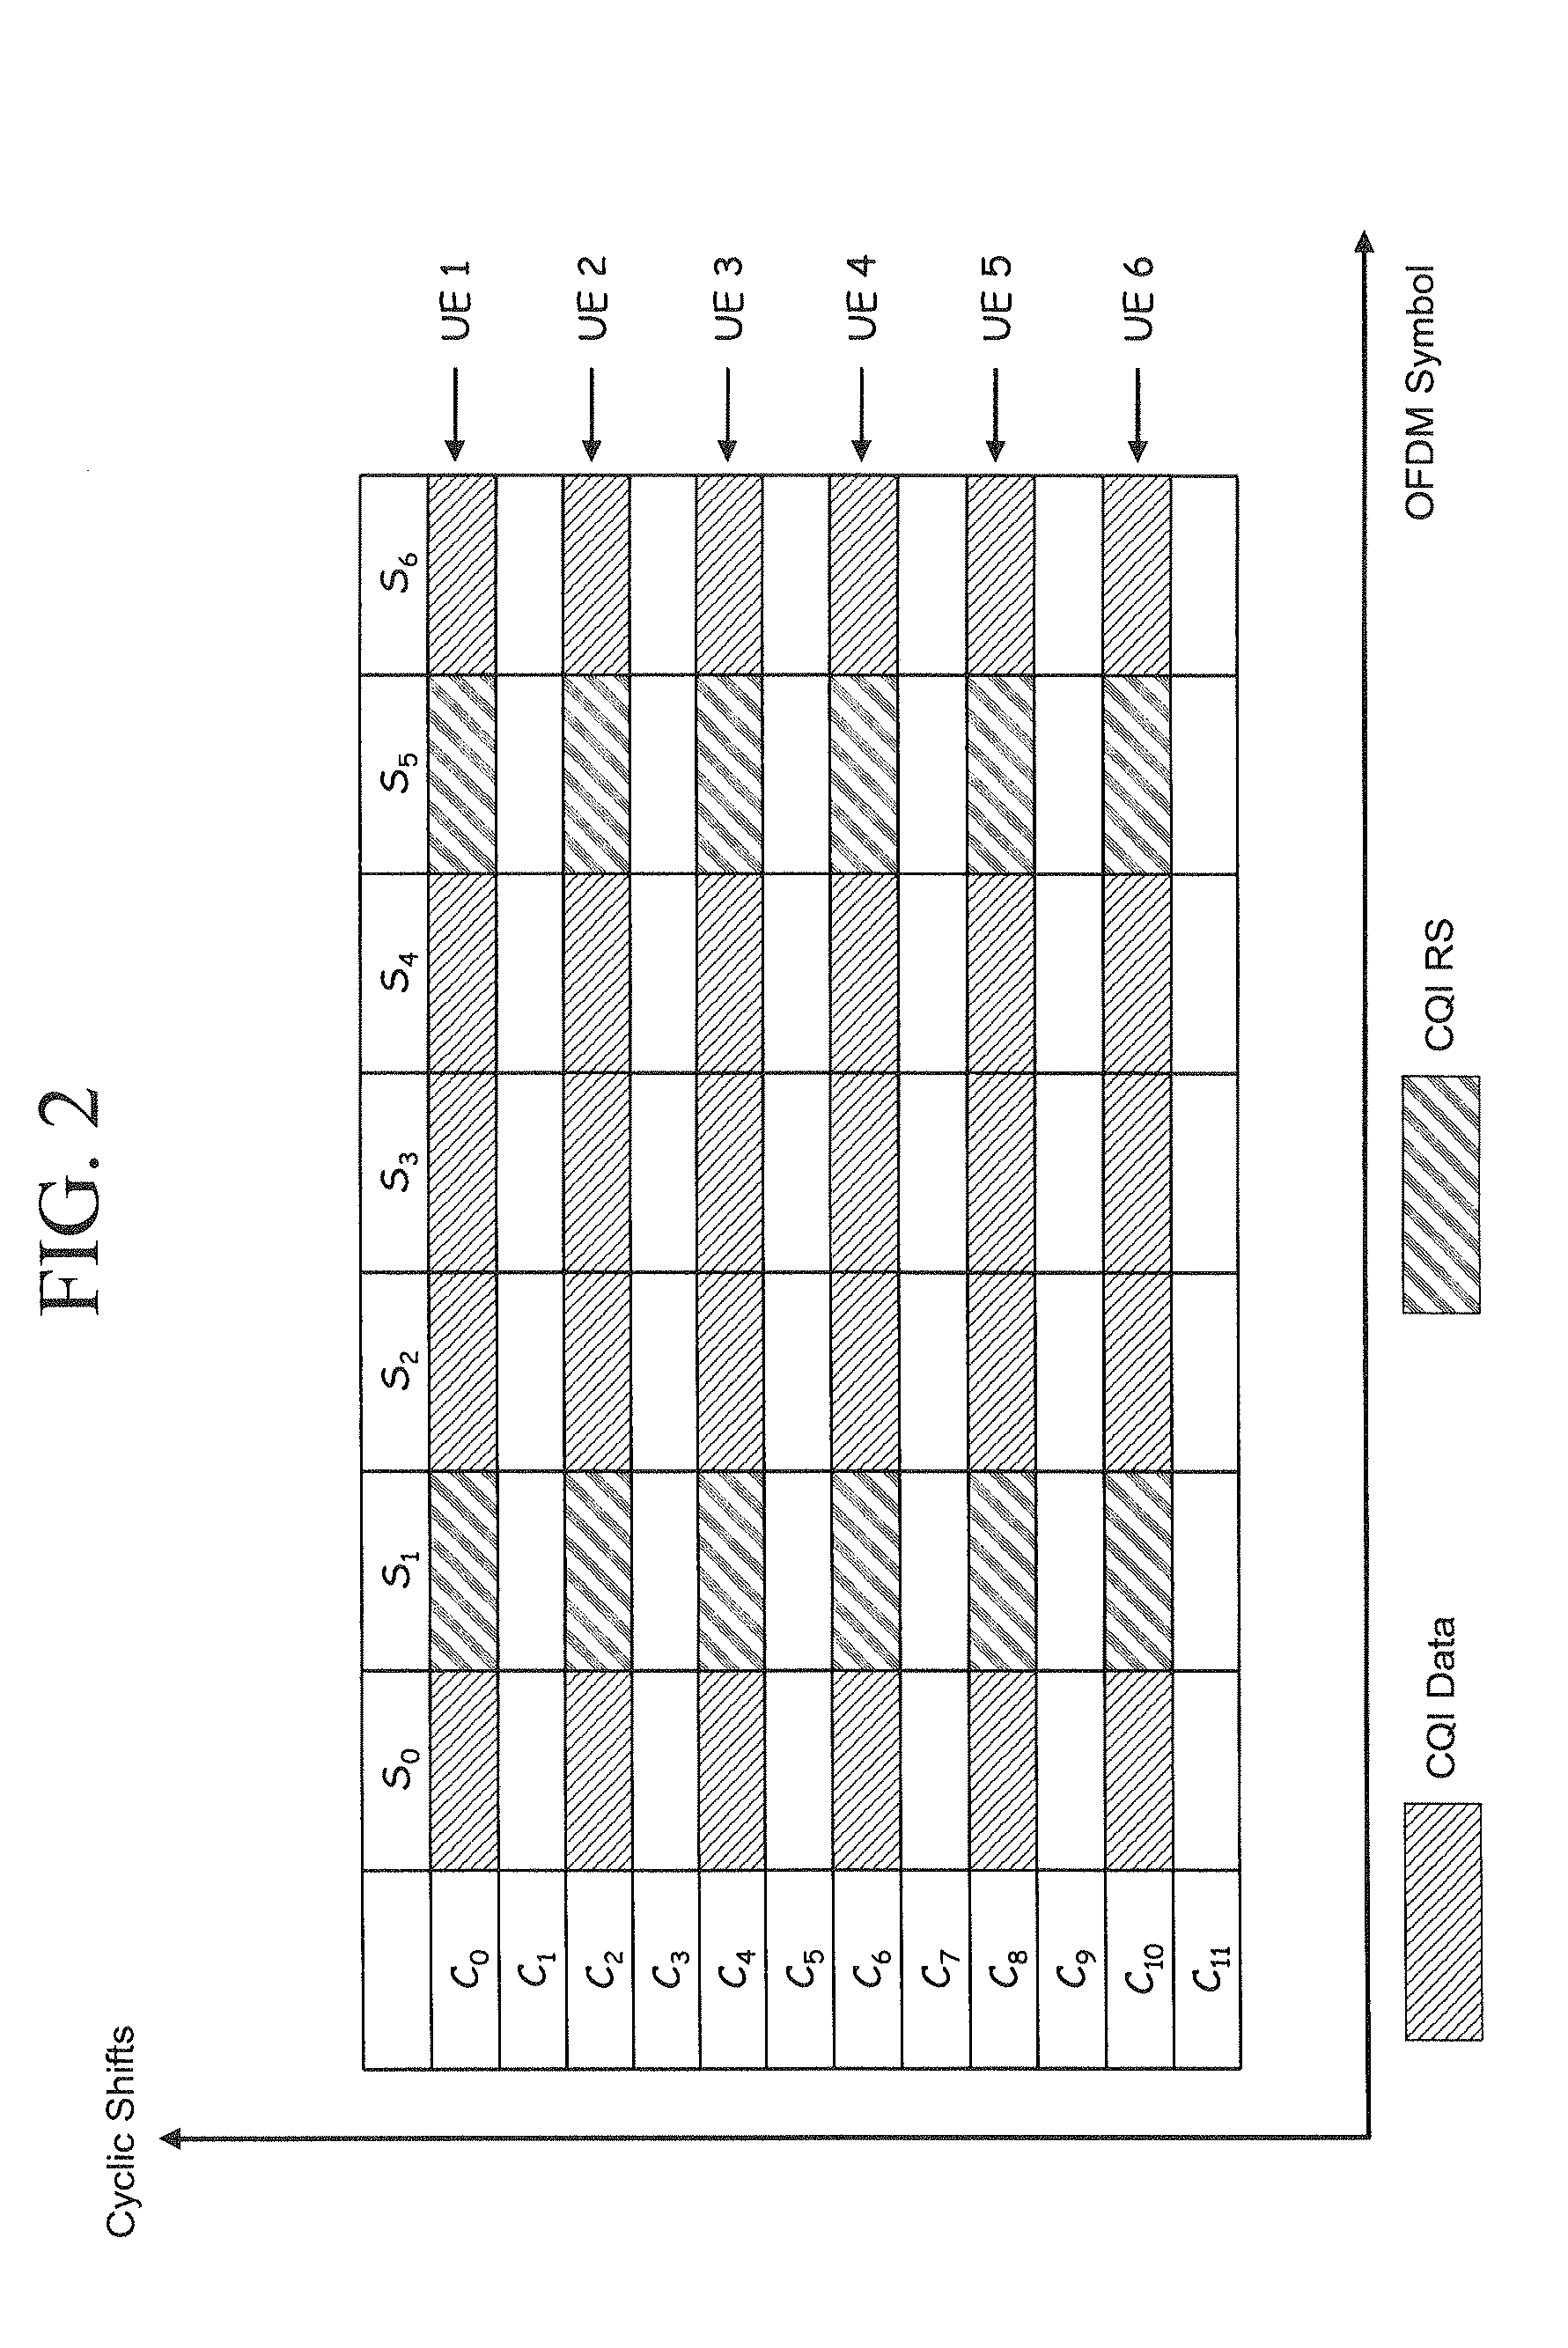 Resource remapping and regrouping in a wireless communication system